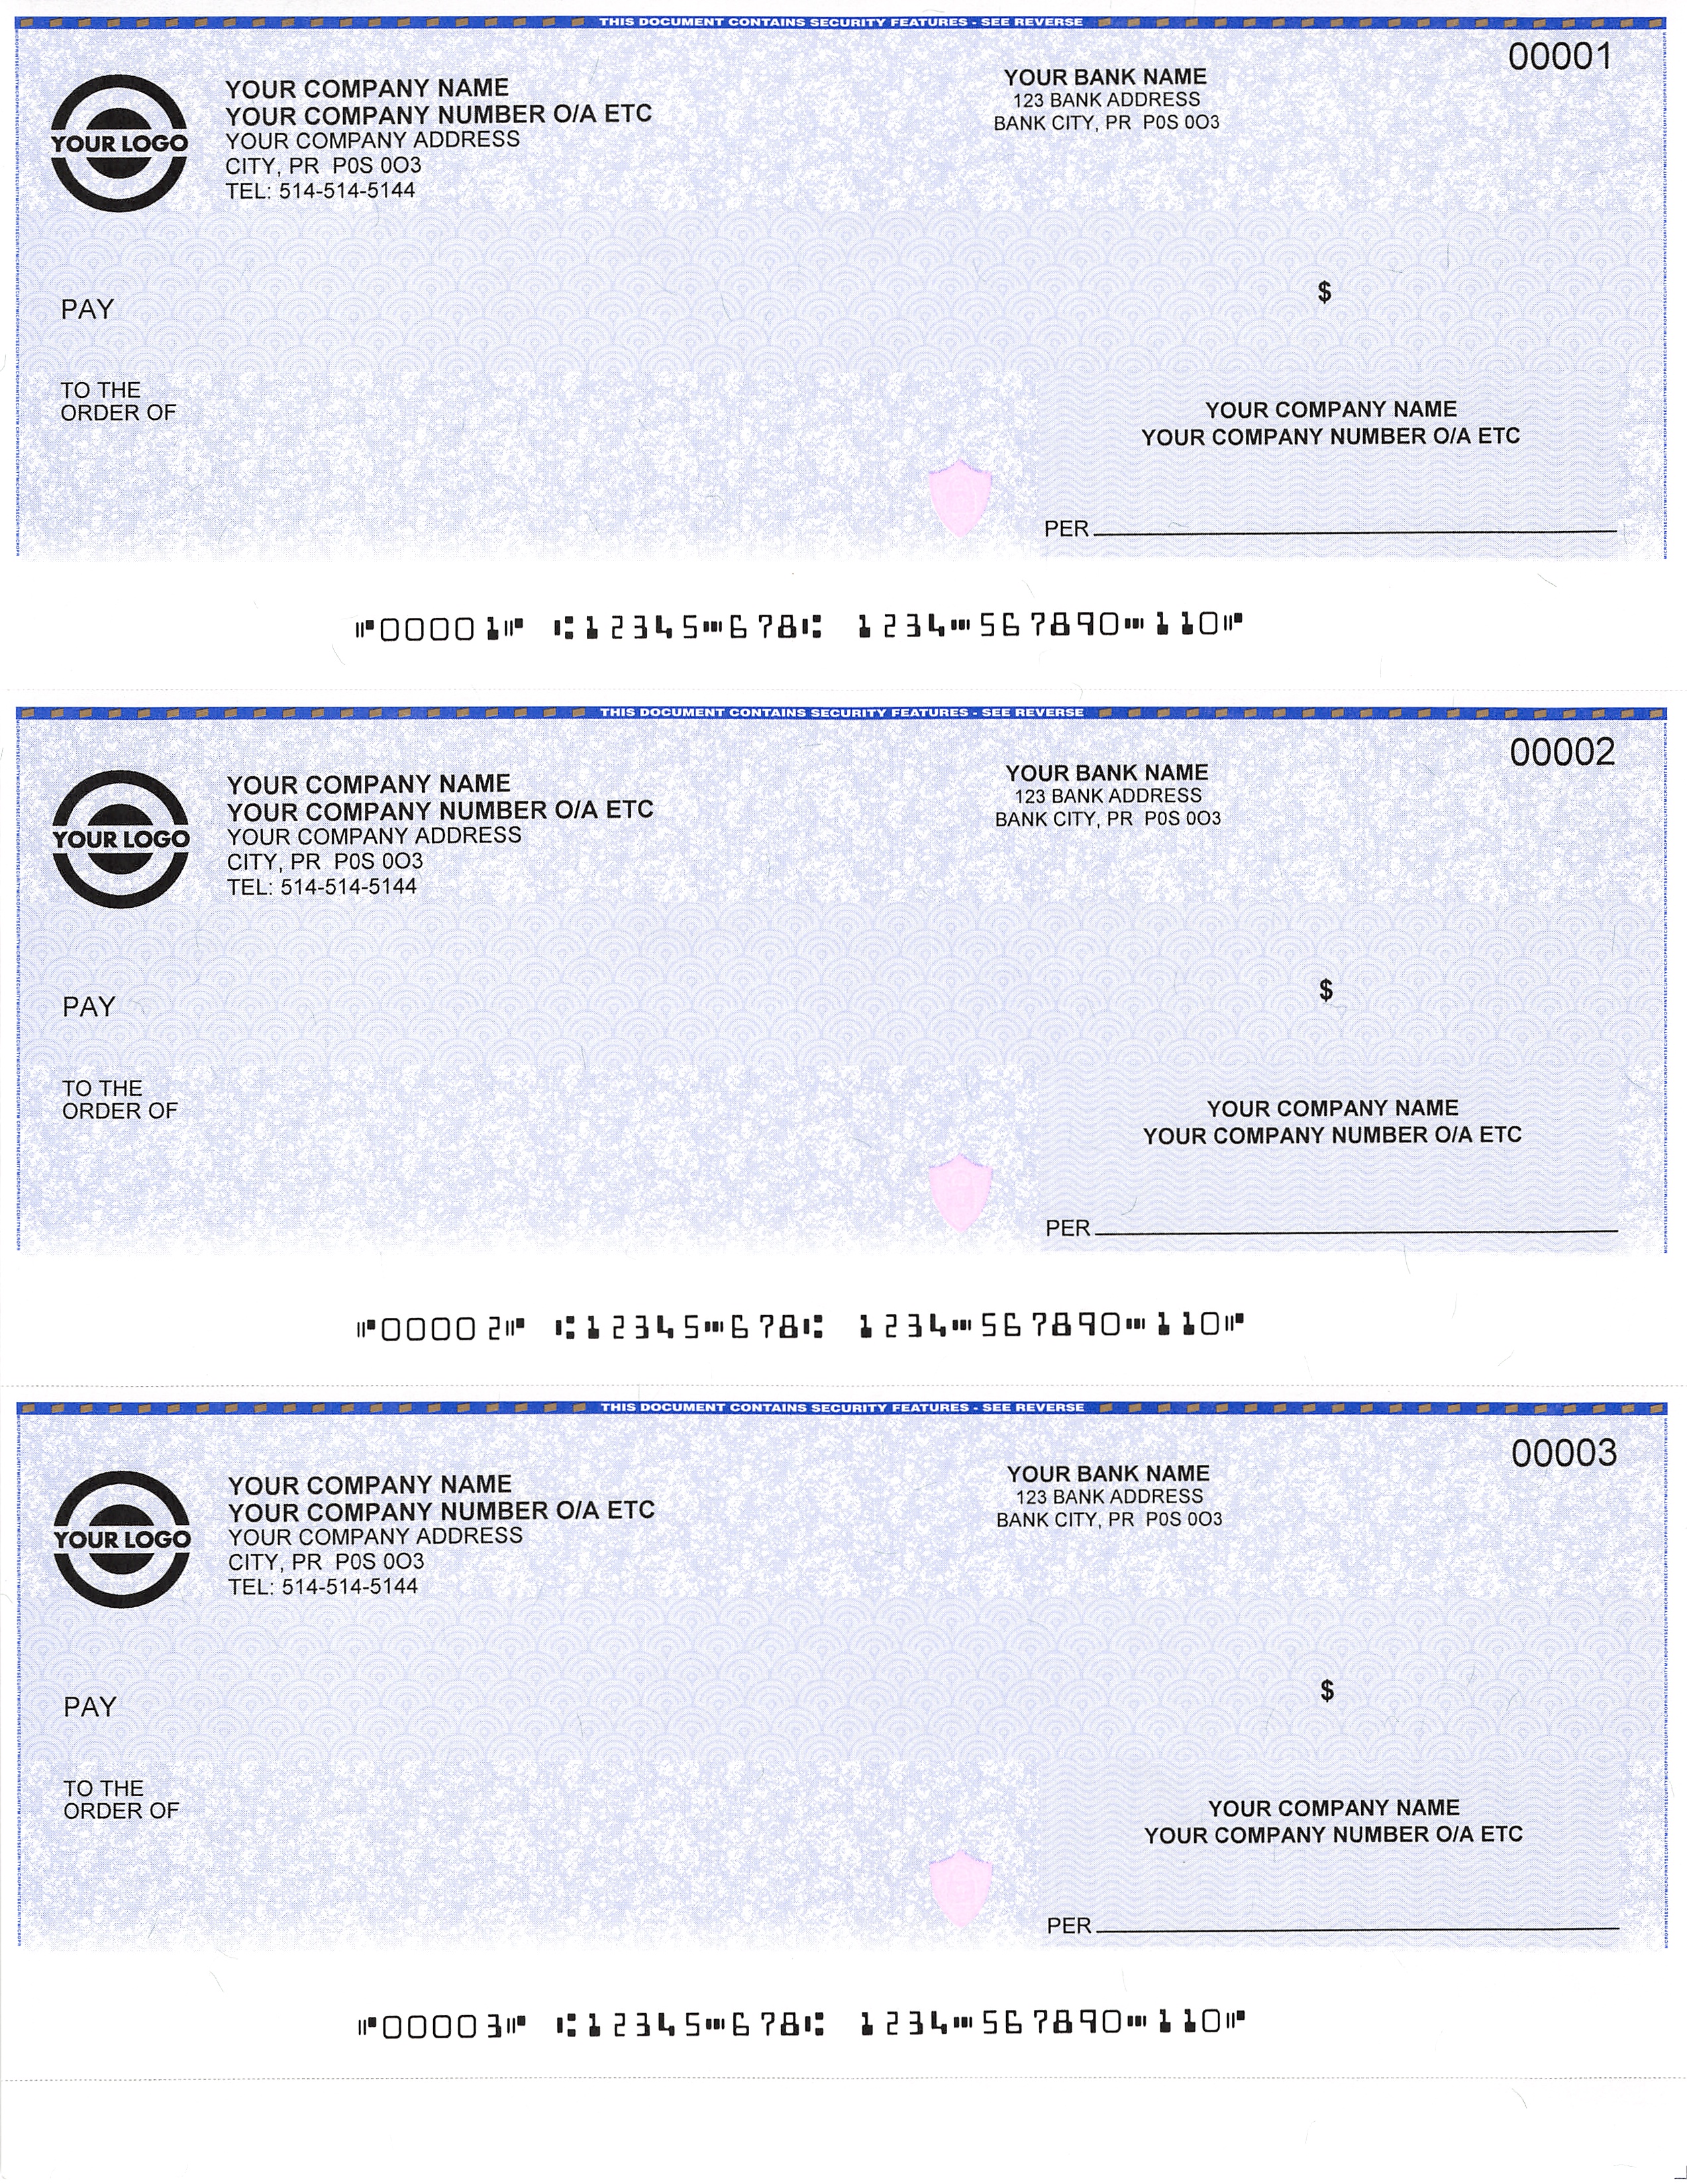 Three-To-A-Page Computer cheques